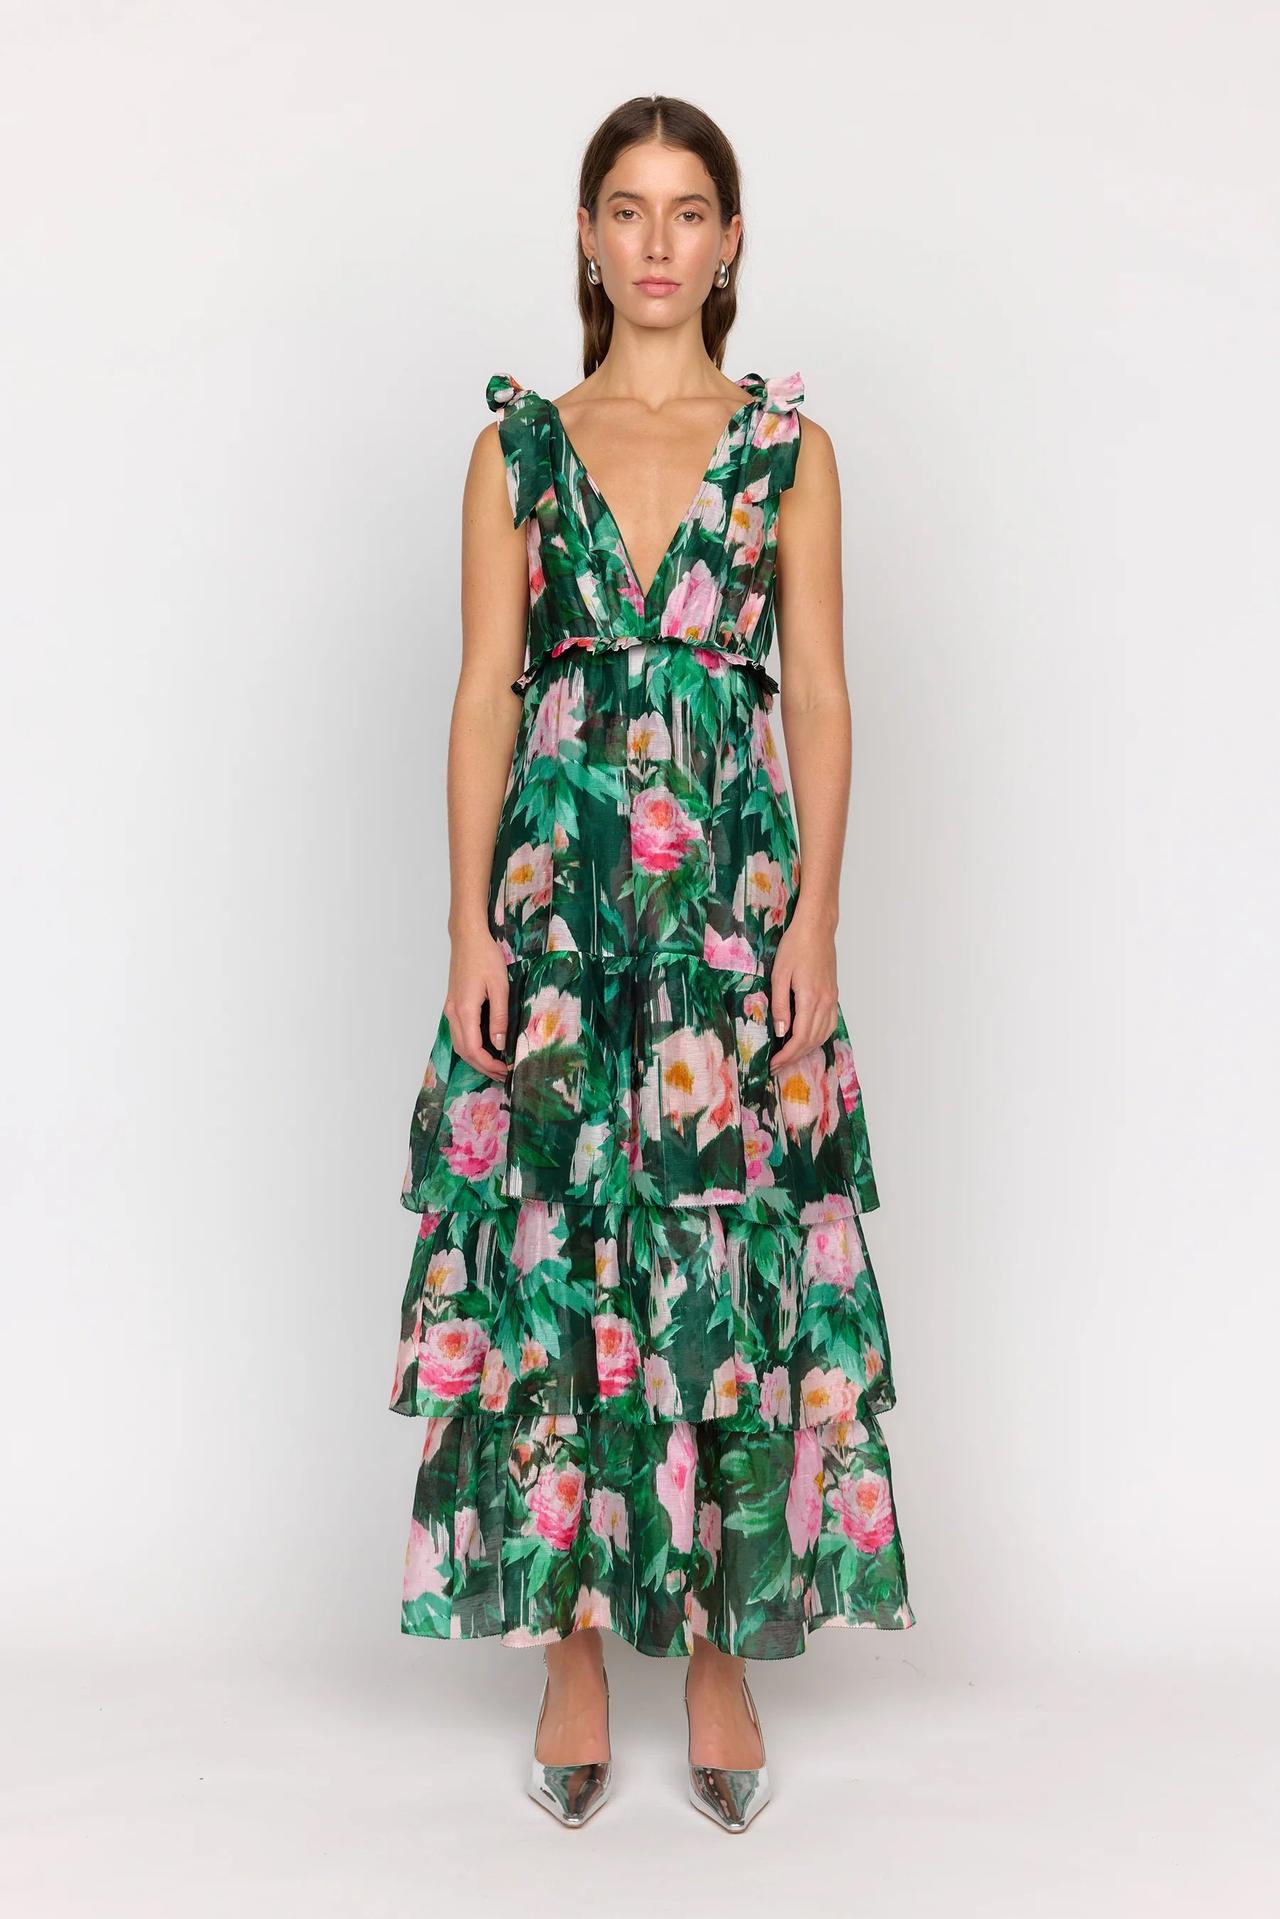 24 Gorgeous Wedding Guest Dresses for Spring